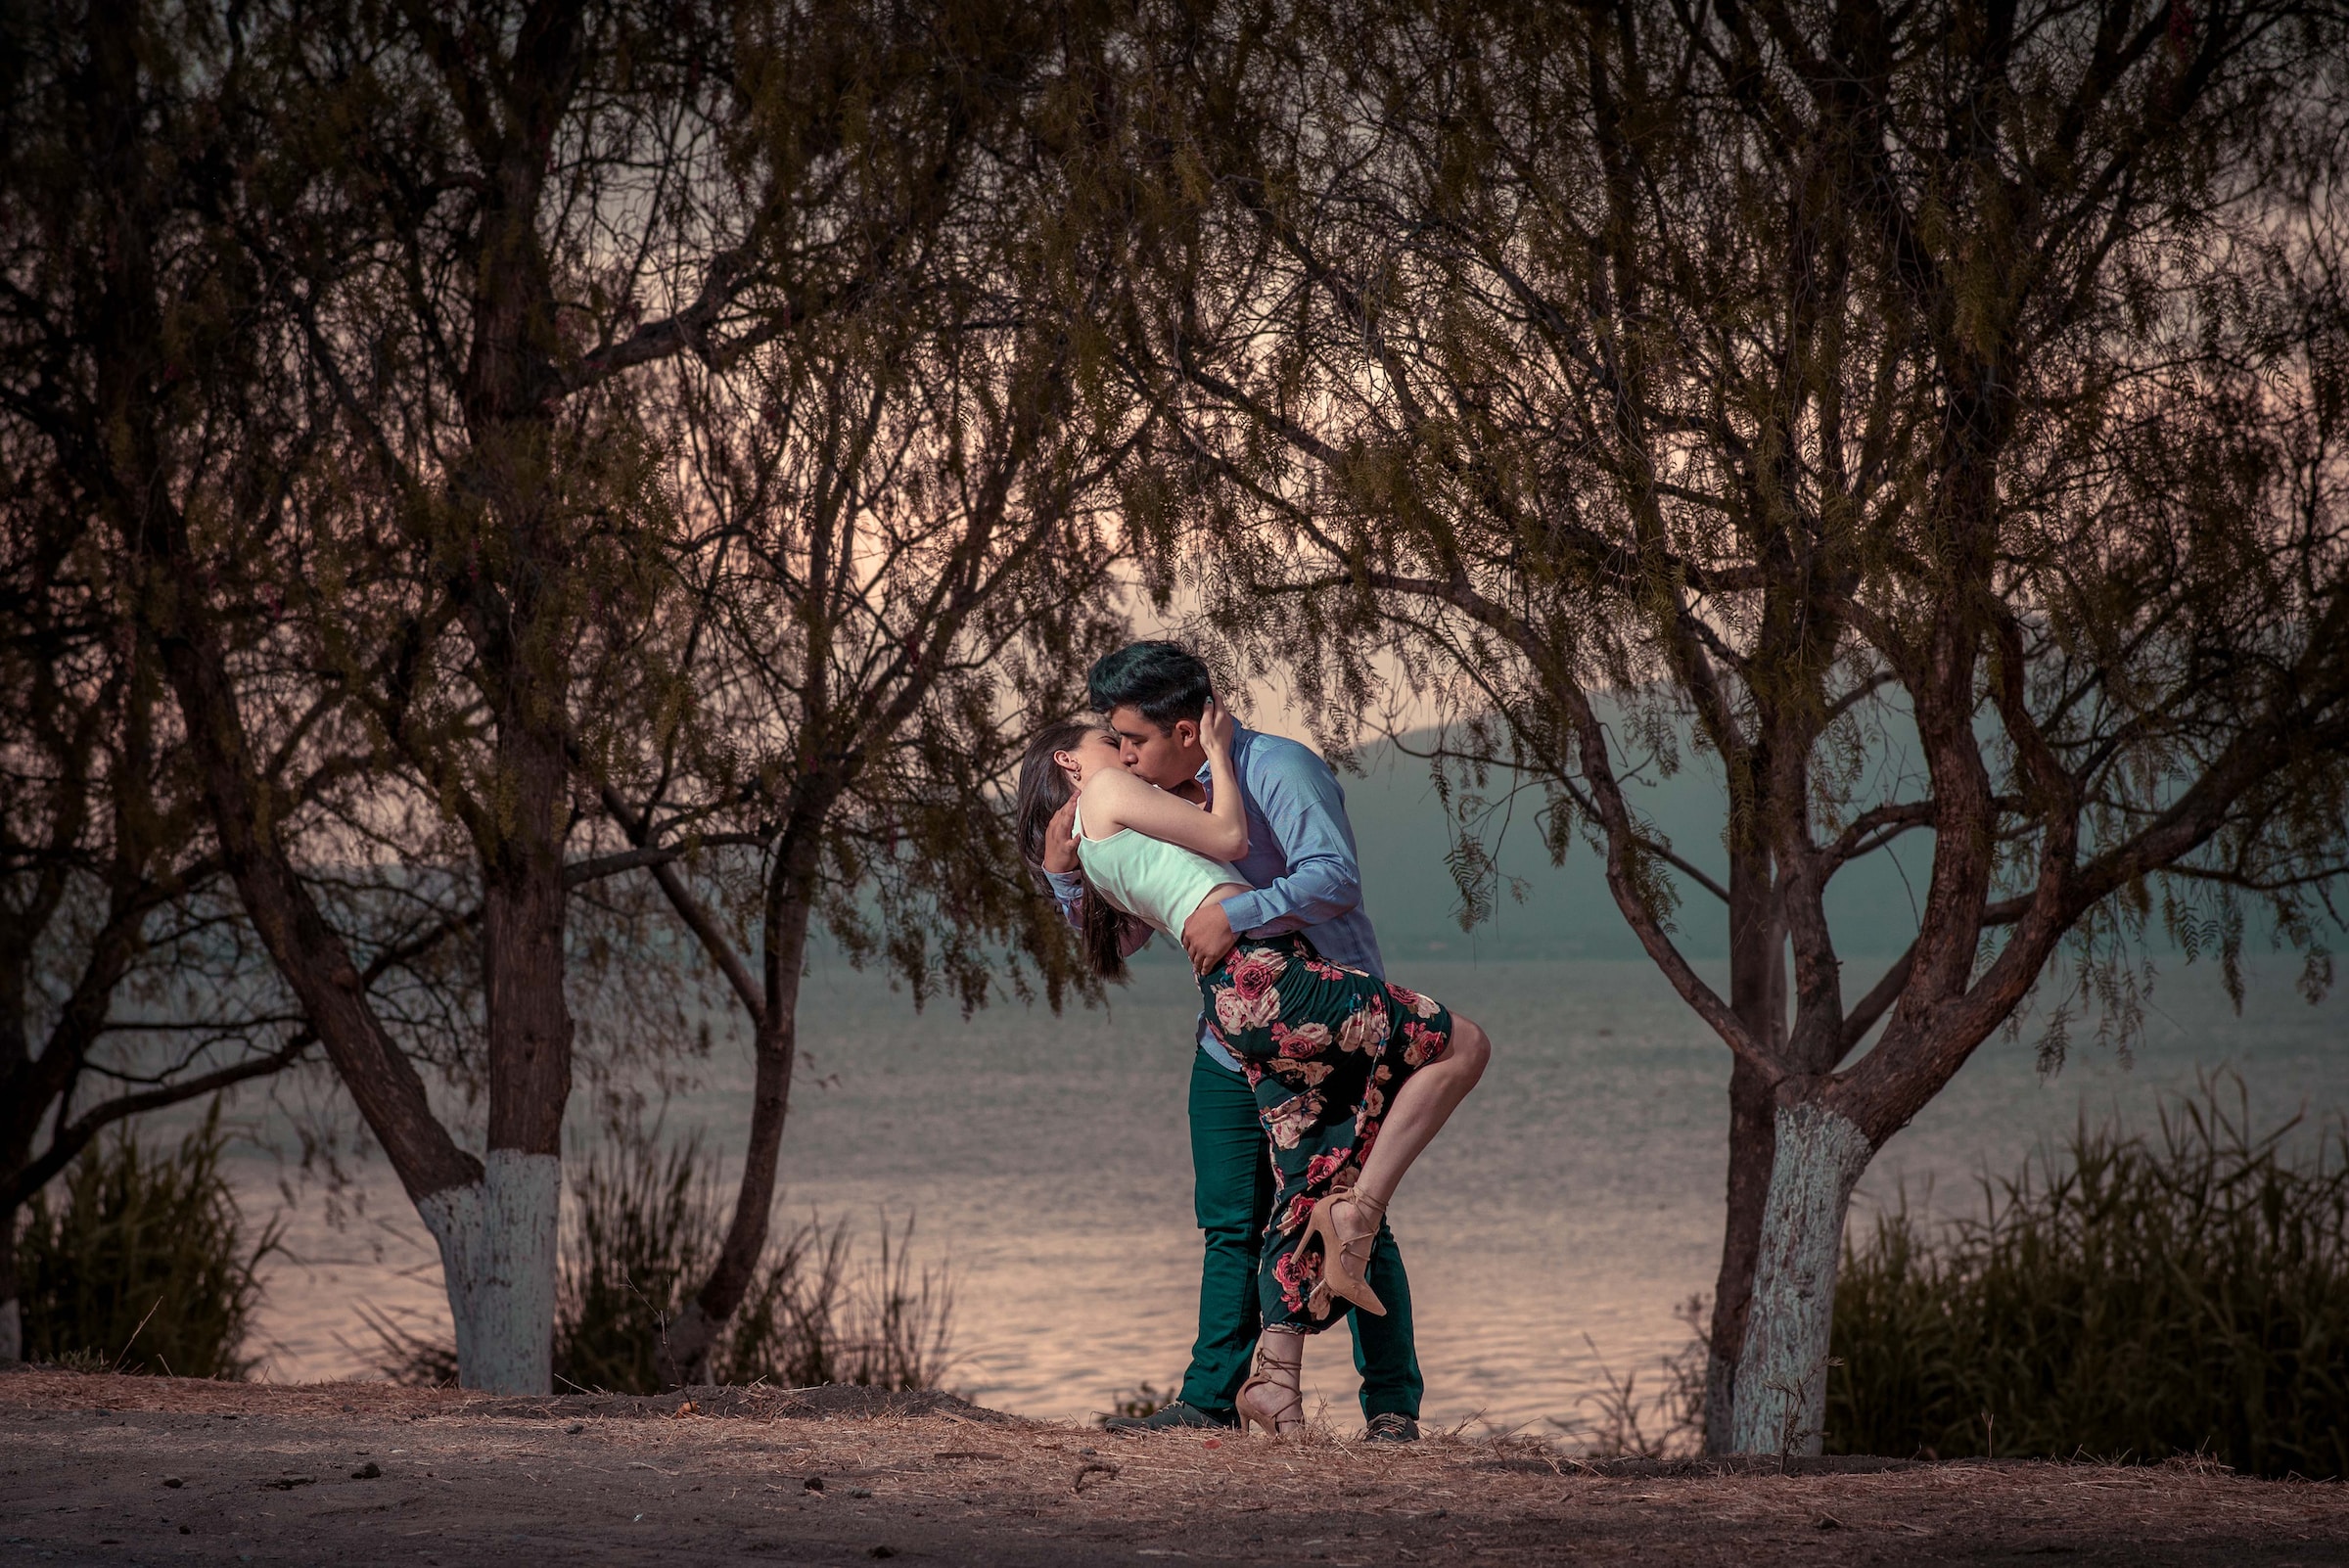 Couple kissing passionately in nature. | Source: Unsplash